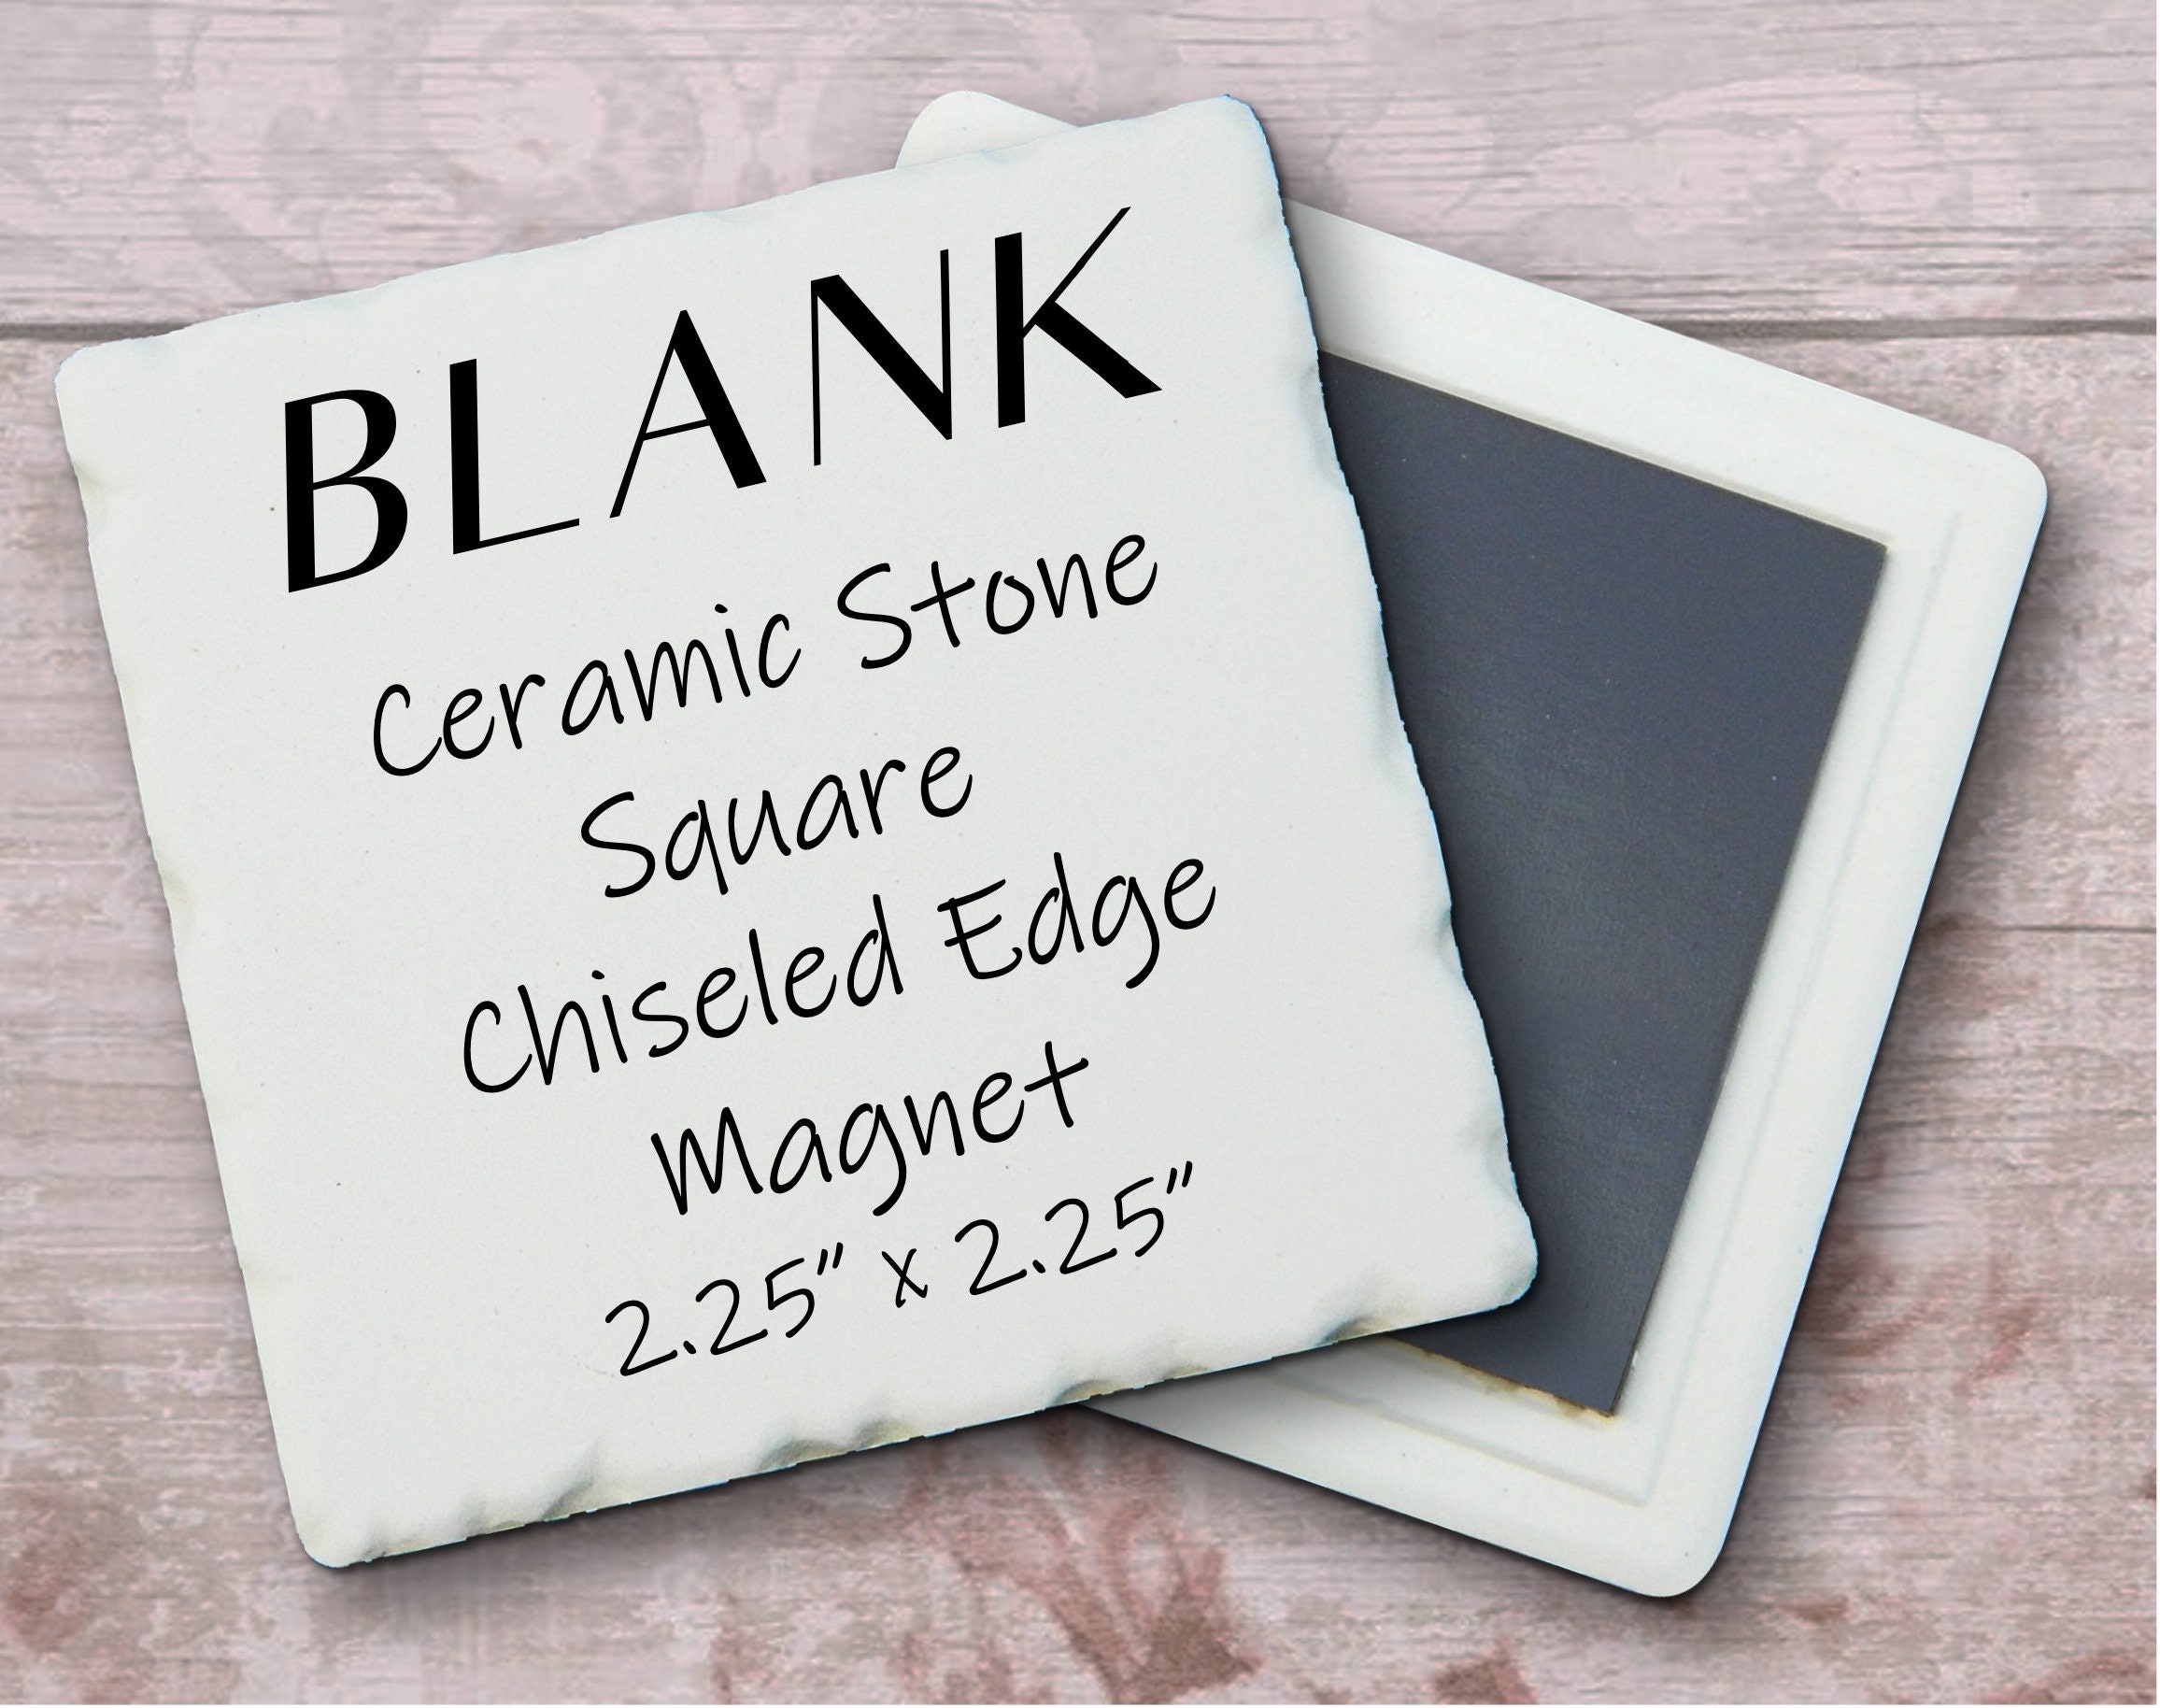 GLOSSY MAGNETIC PAPER 25 Sheets Printable Magnet Sheets 8.5x11